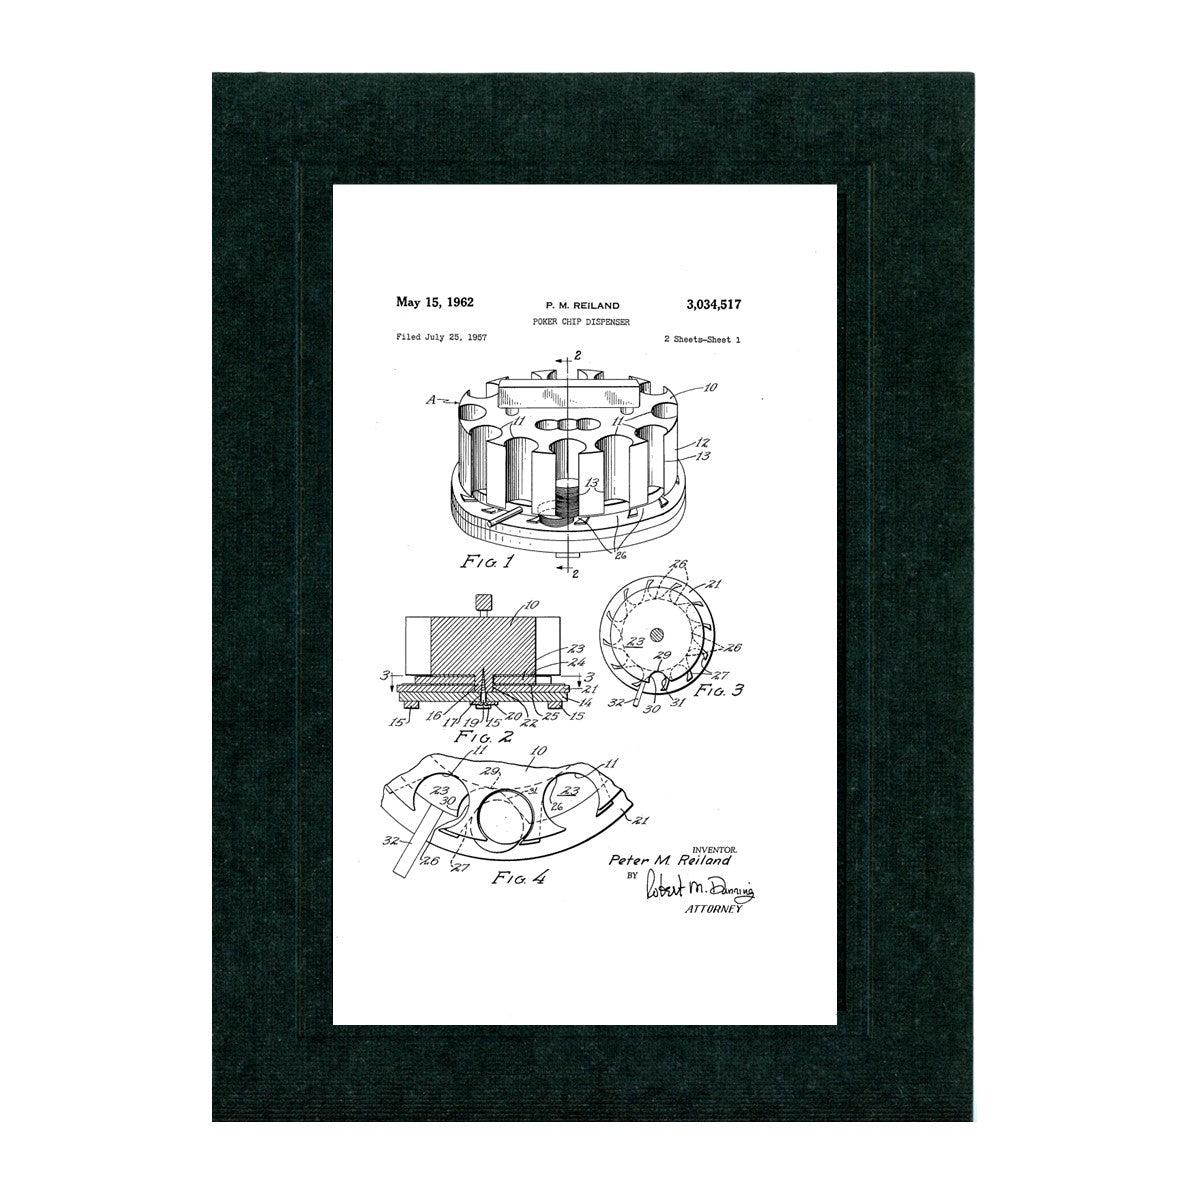 Poker Chips patent card